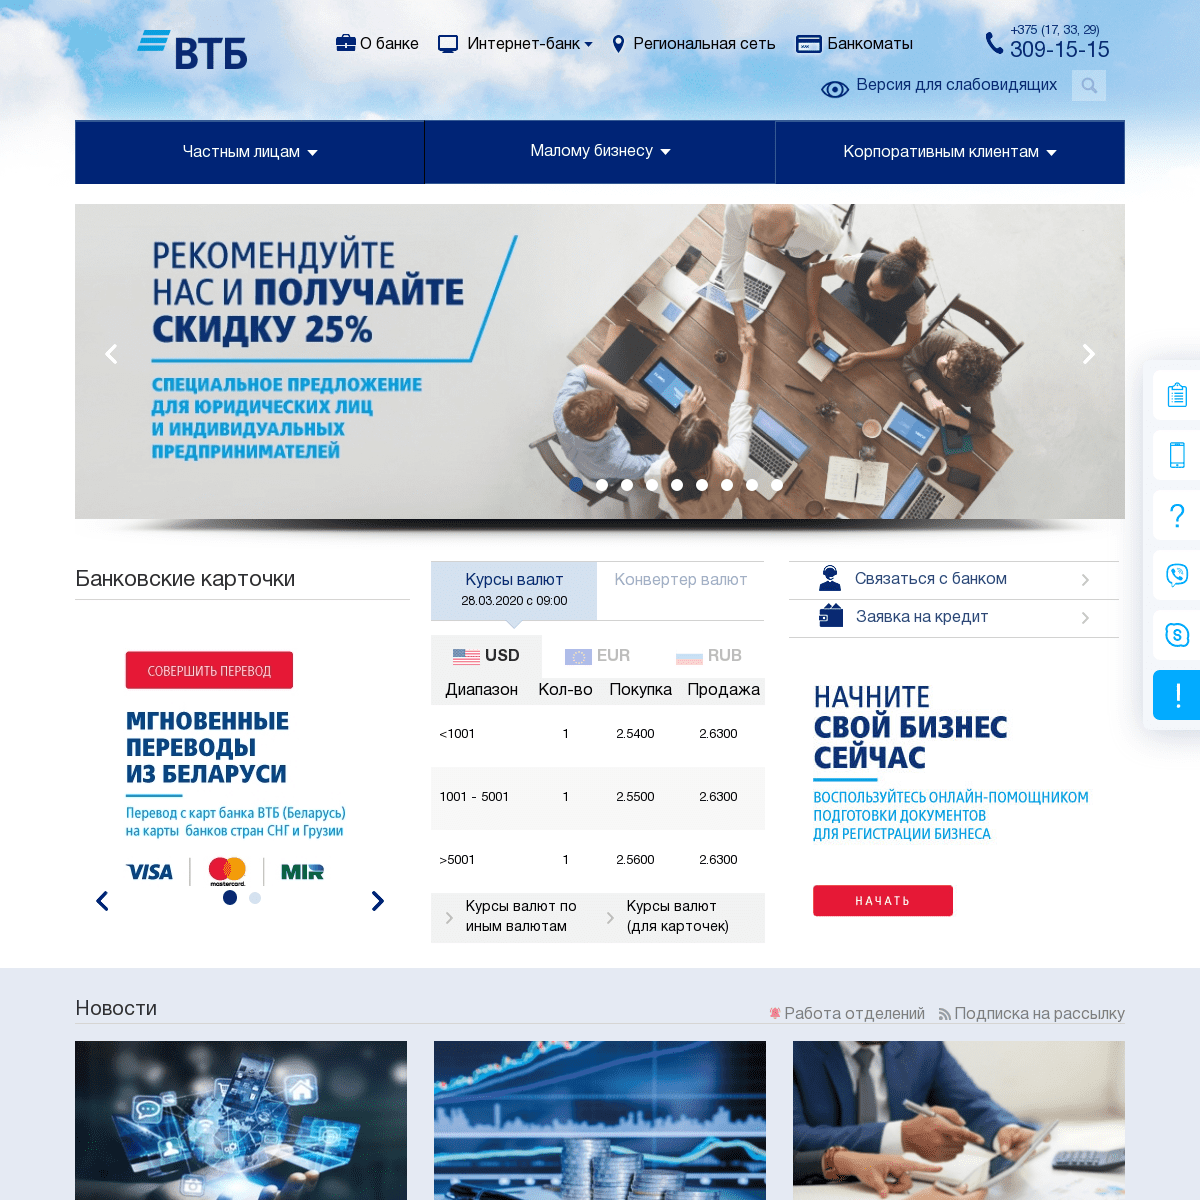 A complete backup of vtb-bank.by